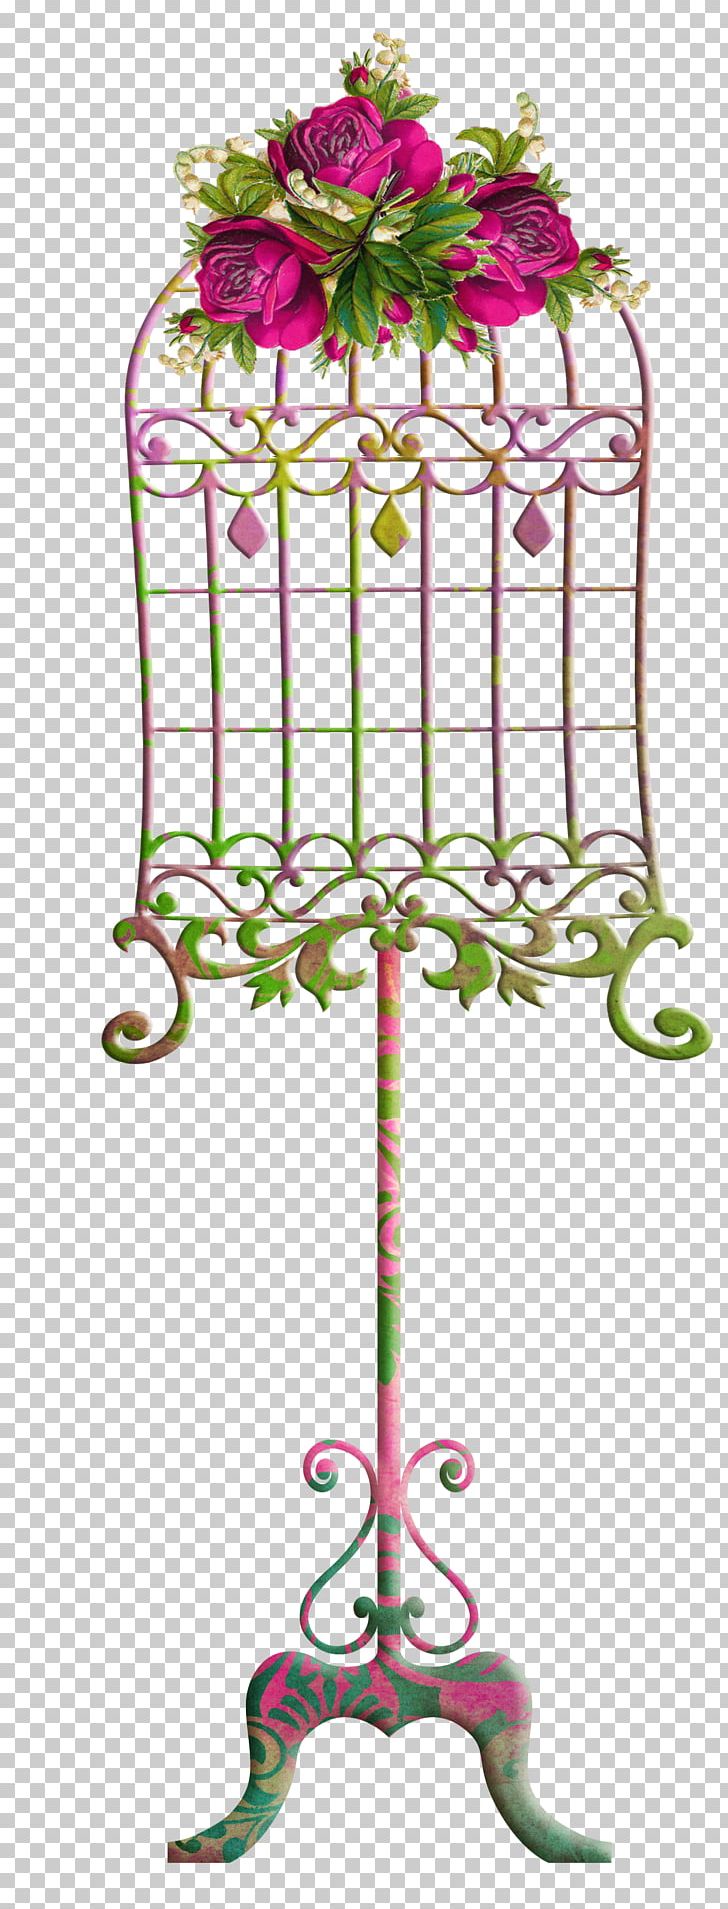 Birdcage PNG, Clipart, Art, Bird, Birdcage, Cage, Clip Art Free PNG Download